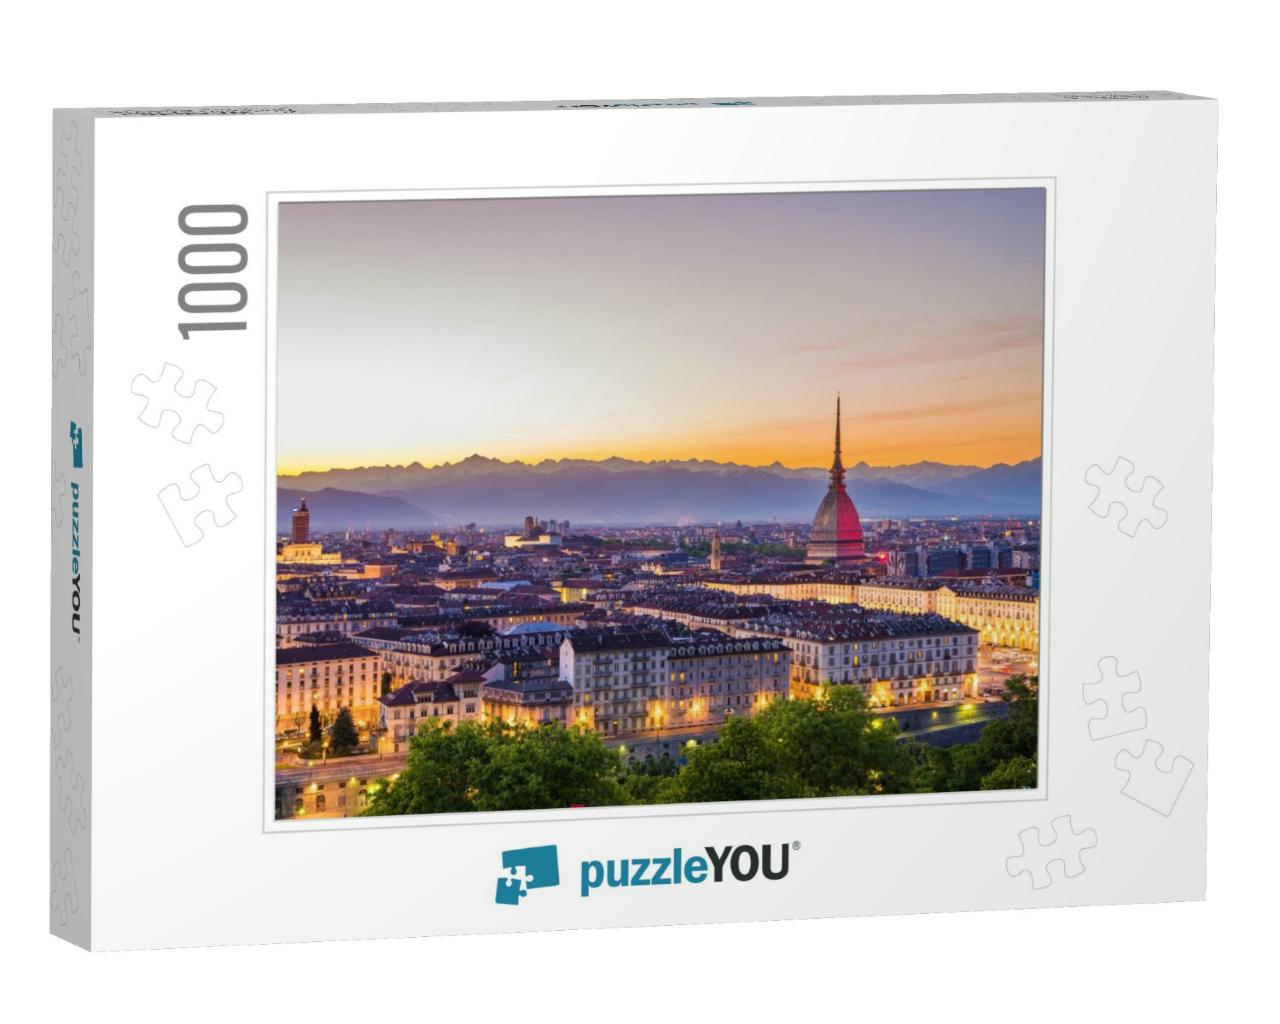 Italia Torino Skyline Turin, Italy, Cityscape At Sunset... Jigsaw Puzzle with 1000 pieces